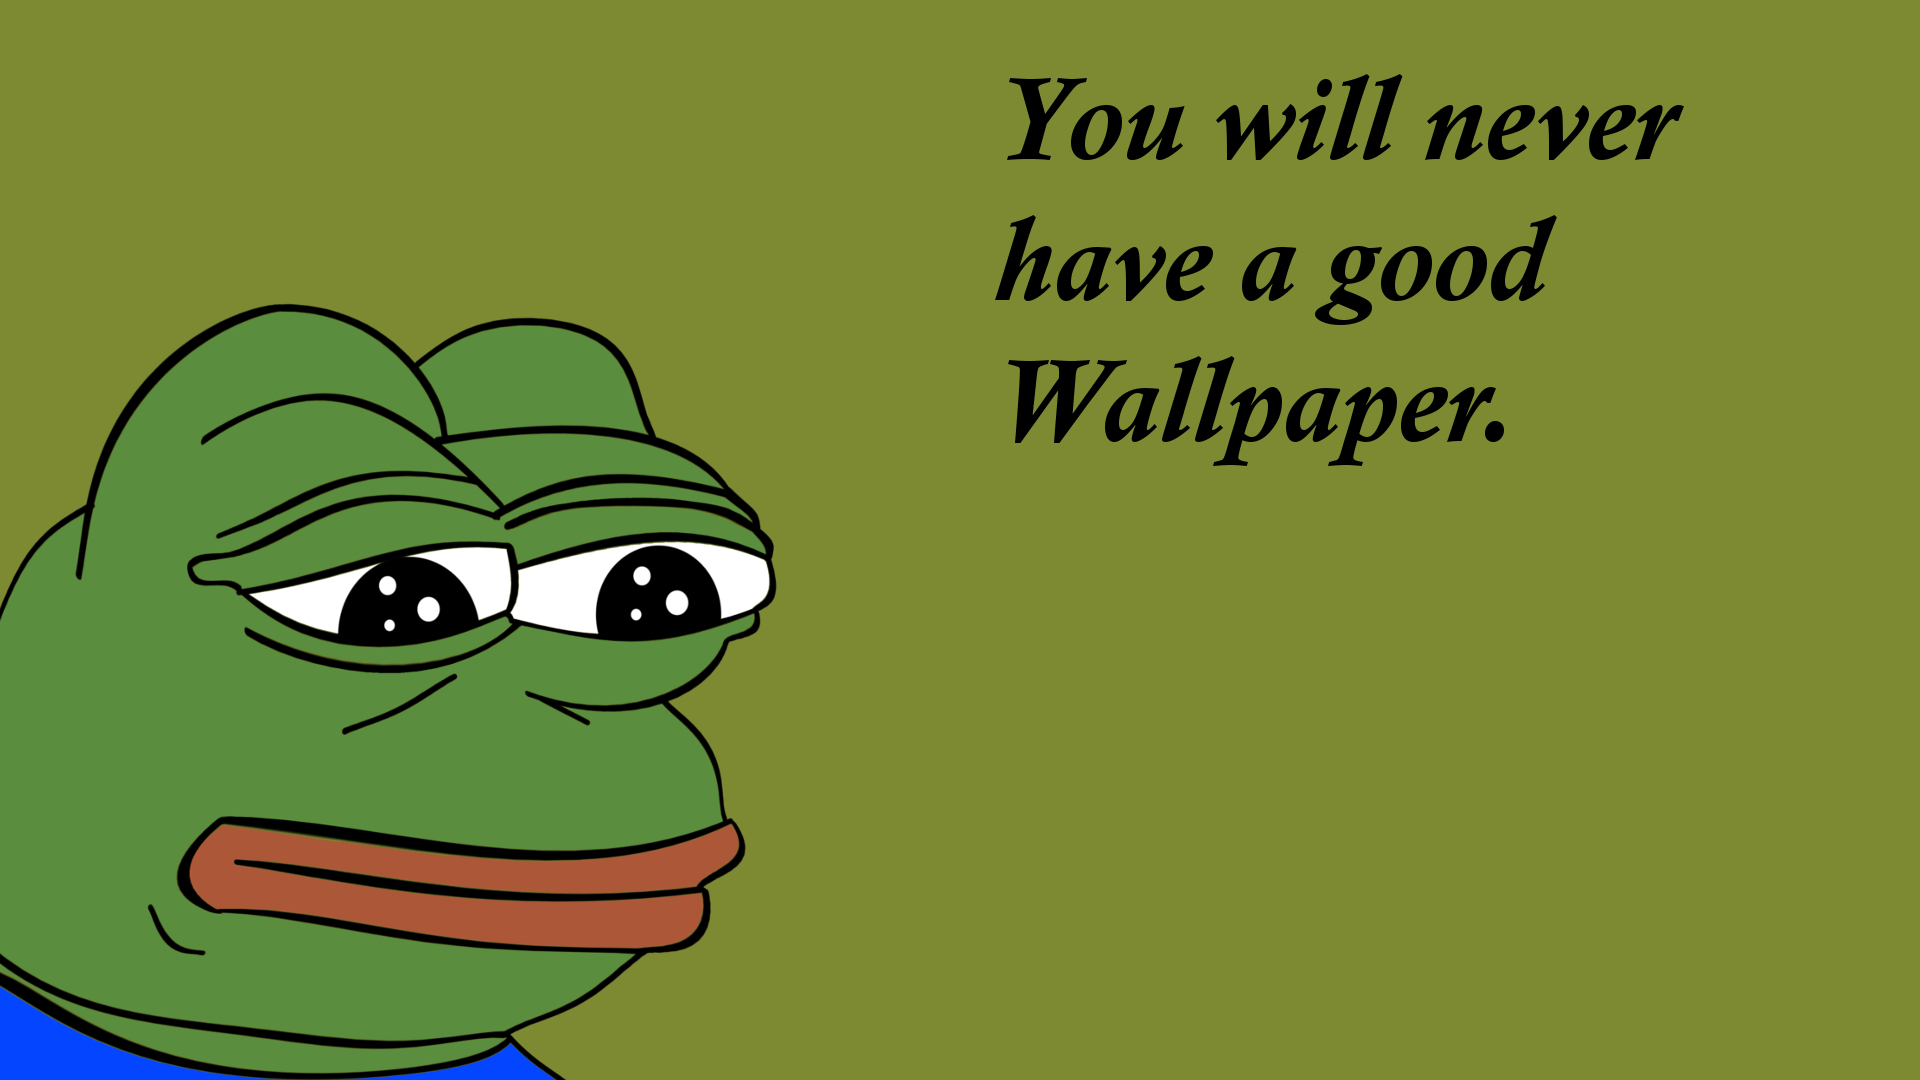 You will never have a good Wallpaper by ADIGITALSM1LEY 1920x1080